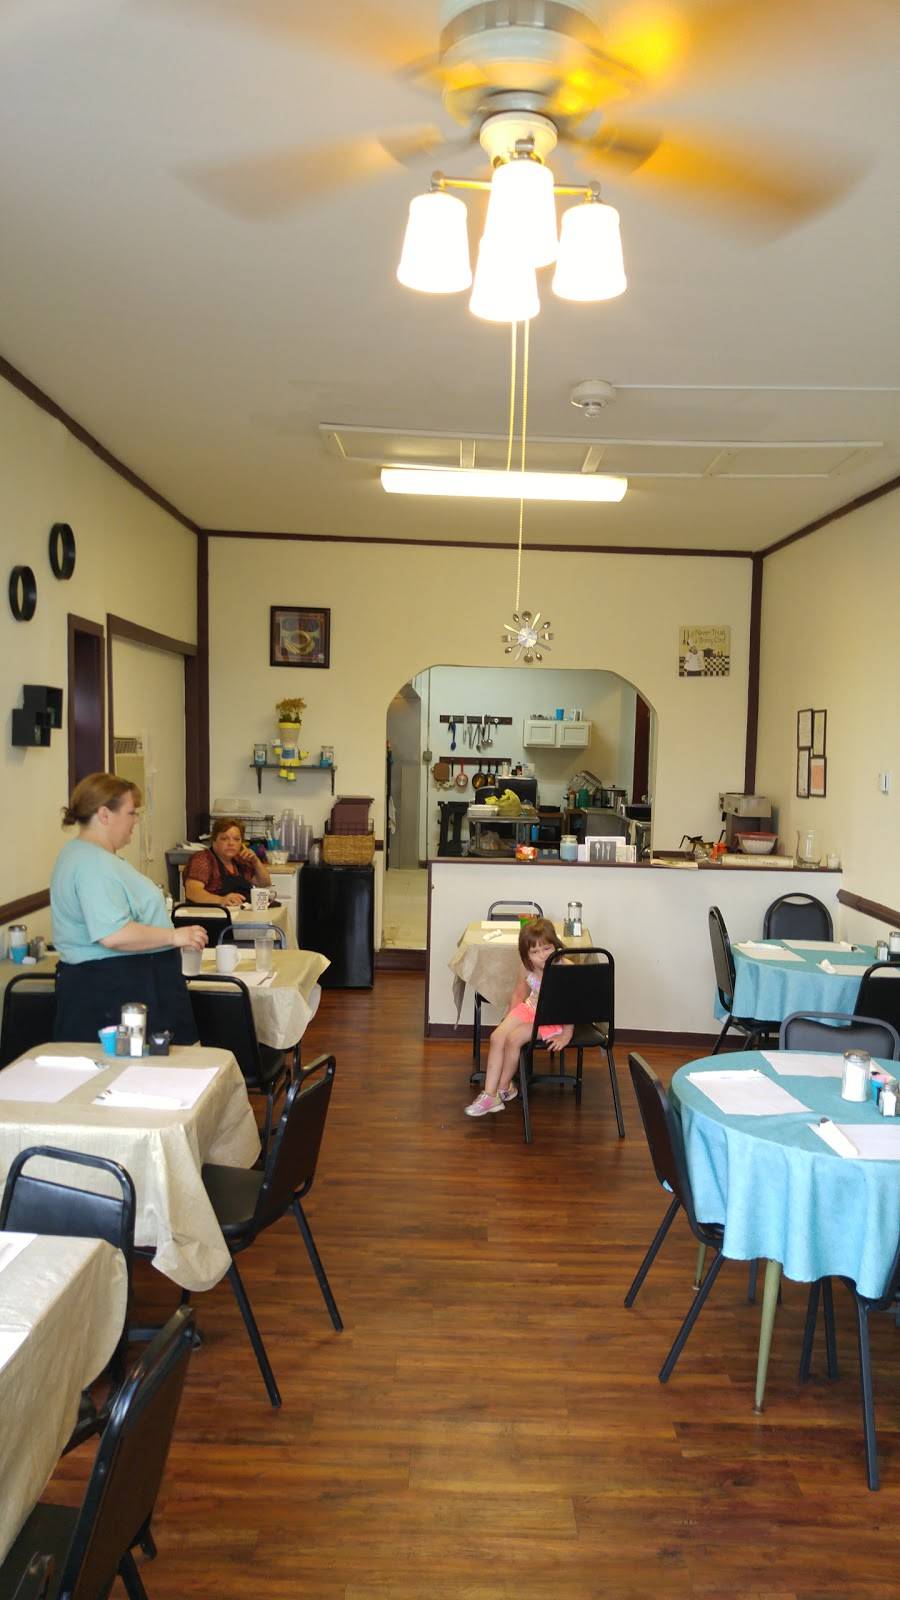 Norma Jeans Cafe | restaurant | 200 Hannibal St, Fulton, NY 13069, USA | 3152978262 OR +1 315-297-8262